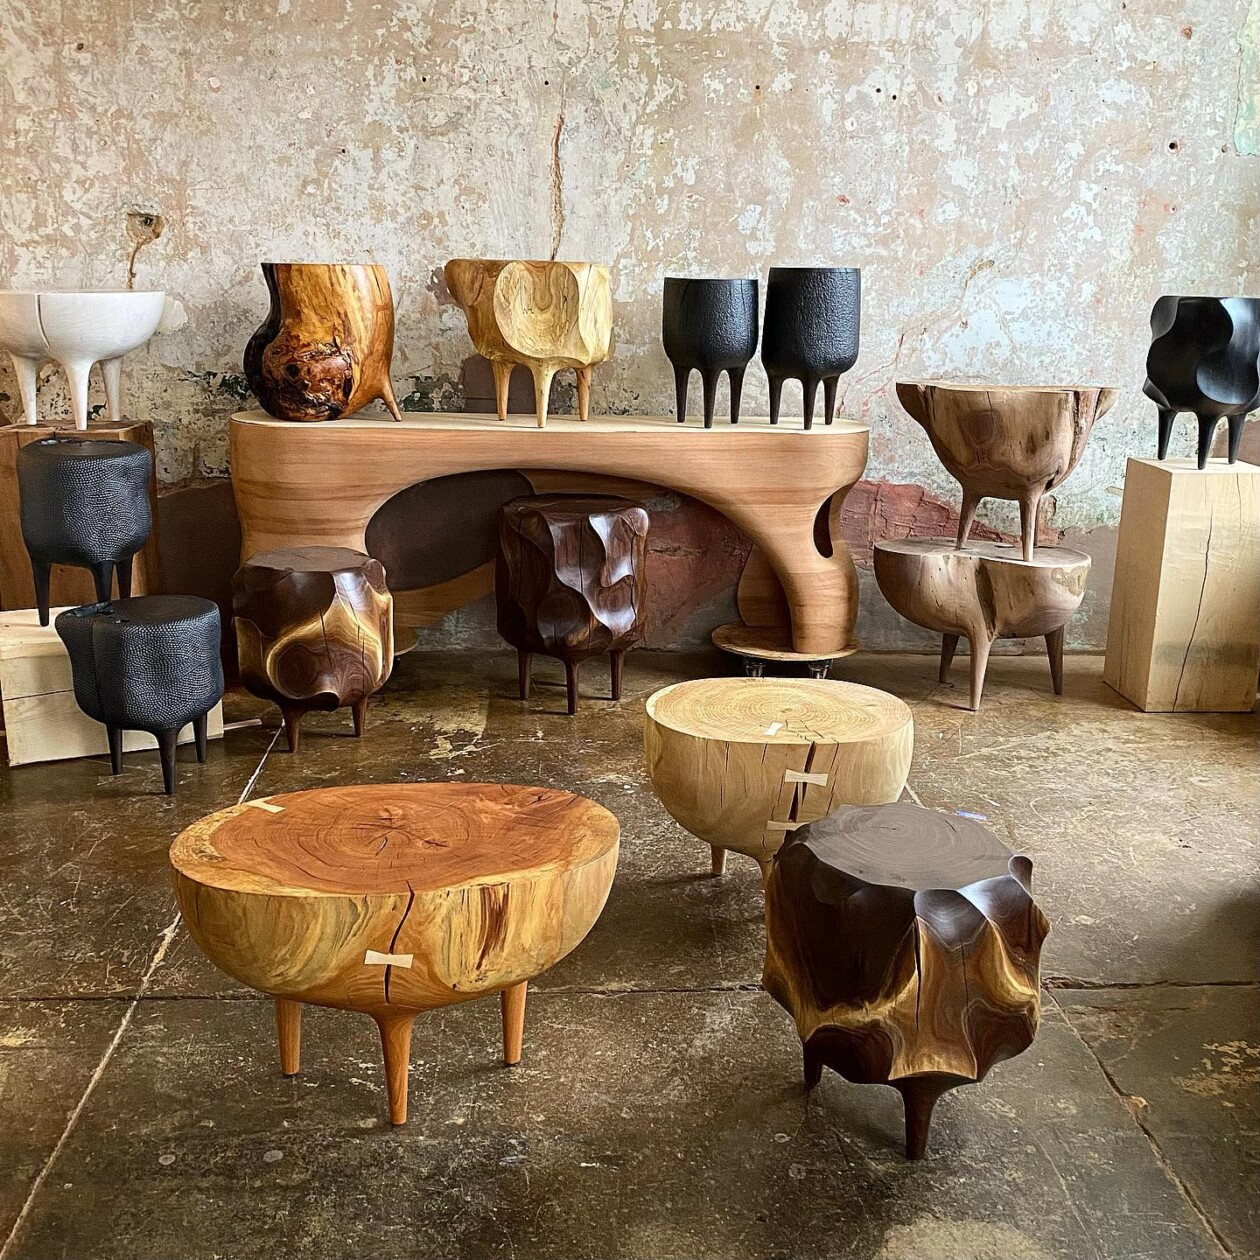 Intricately Engraved And Textured Organic Shaped Furniture By Caleb Woodard (6)